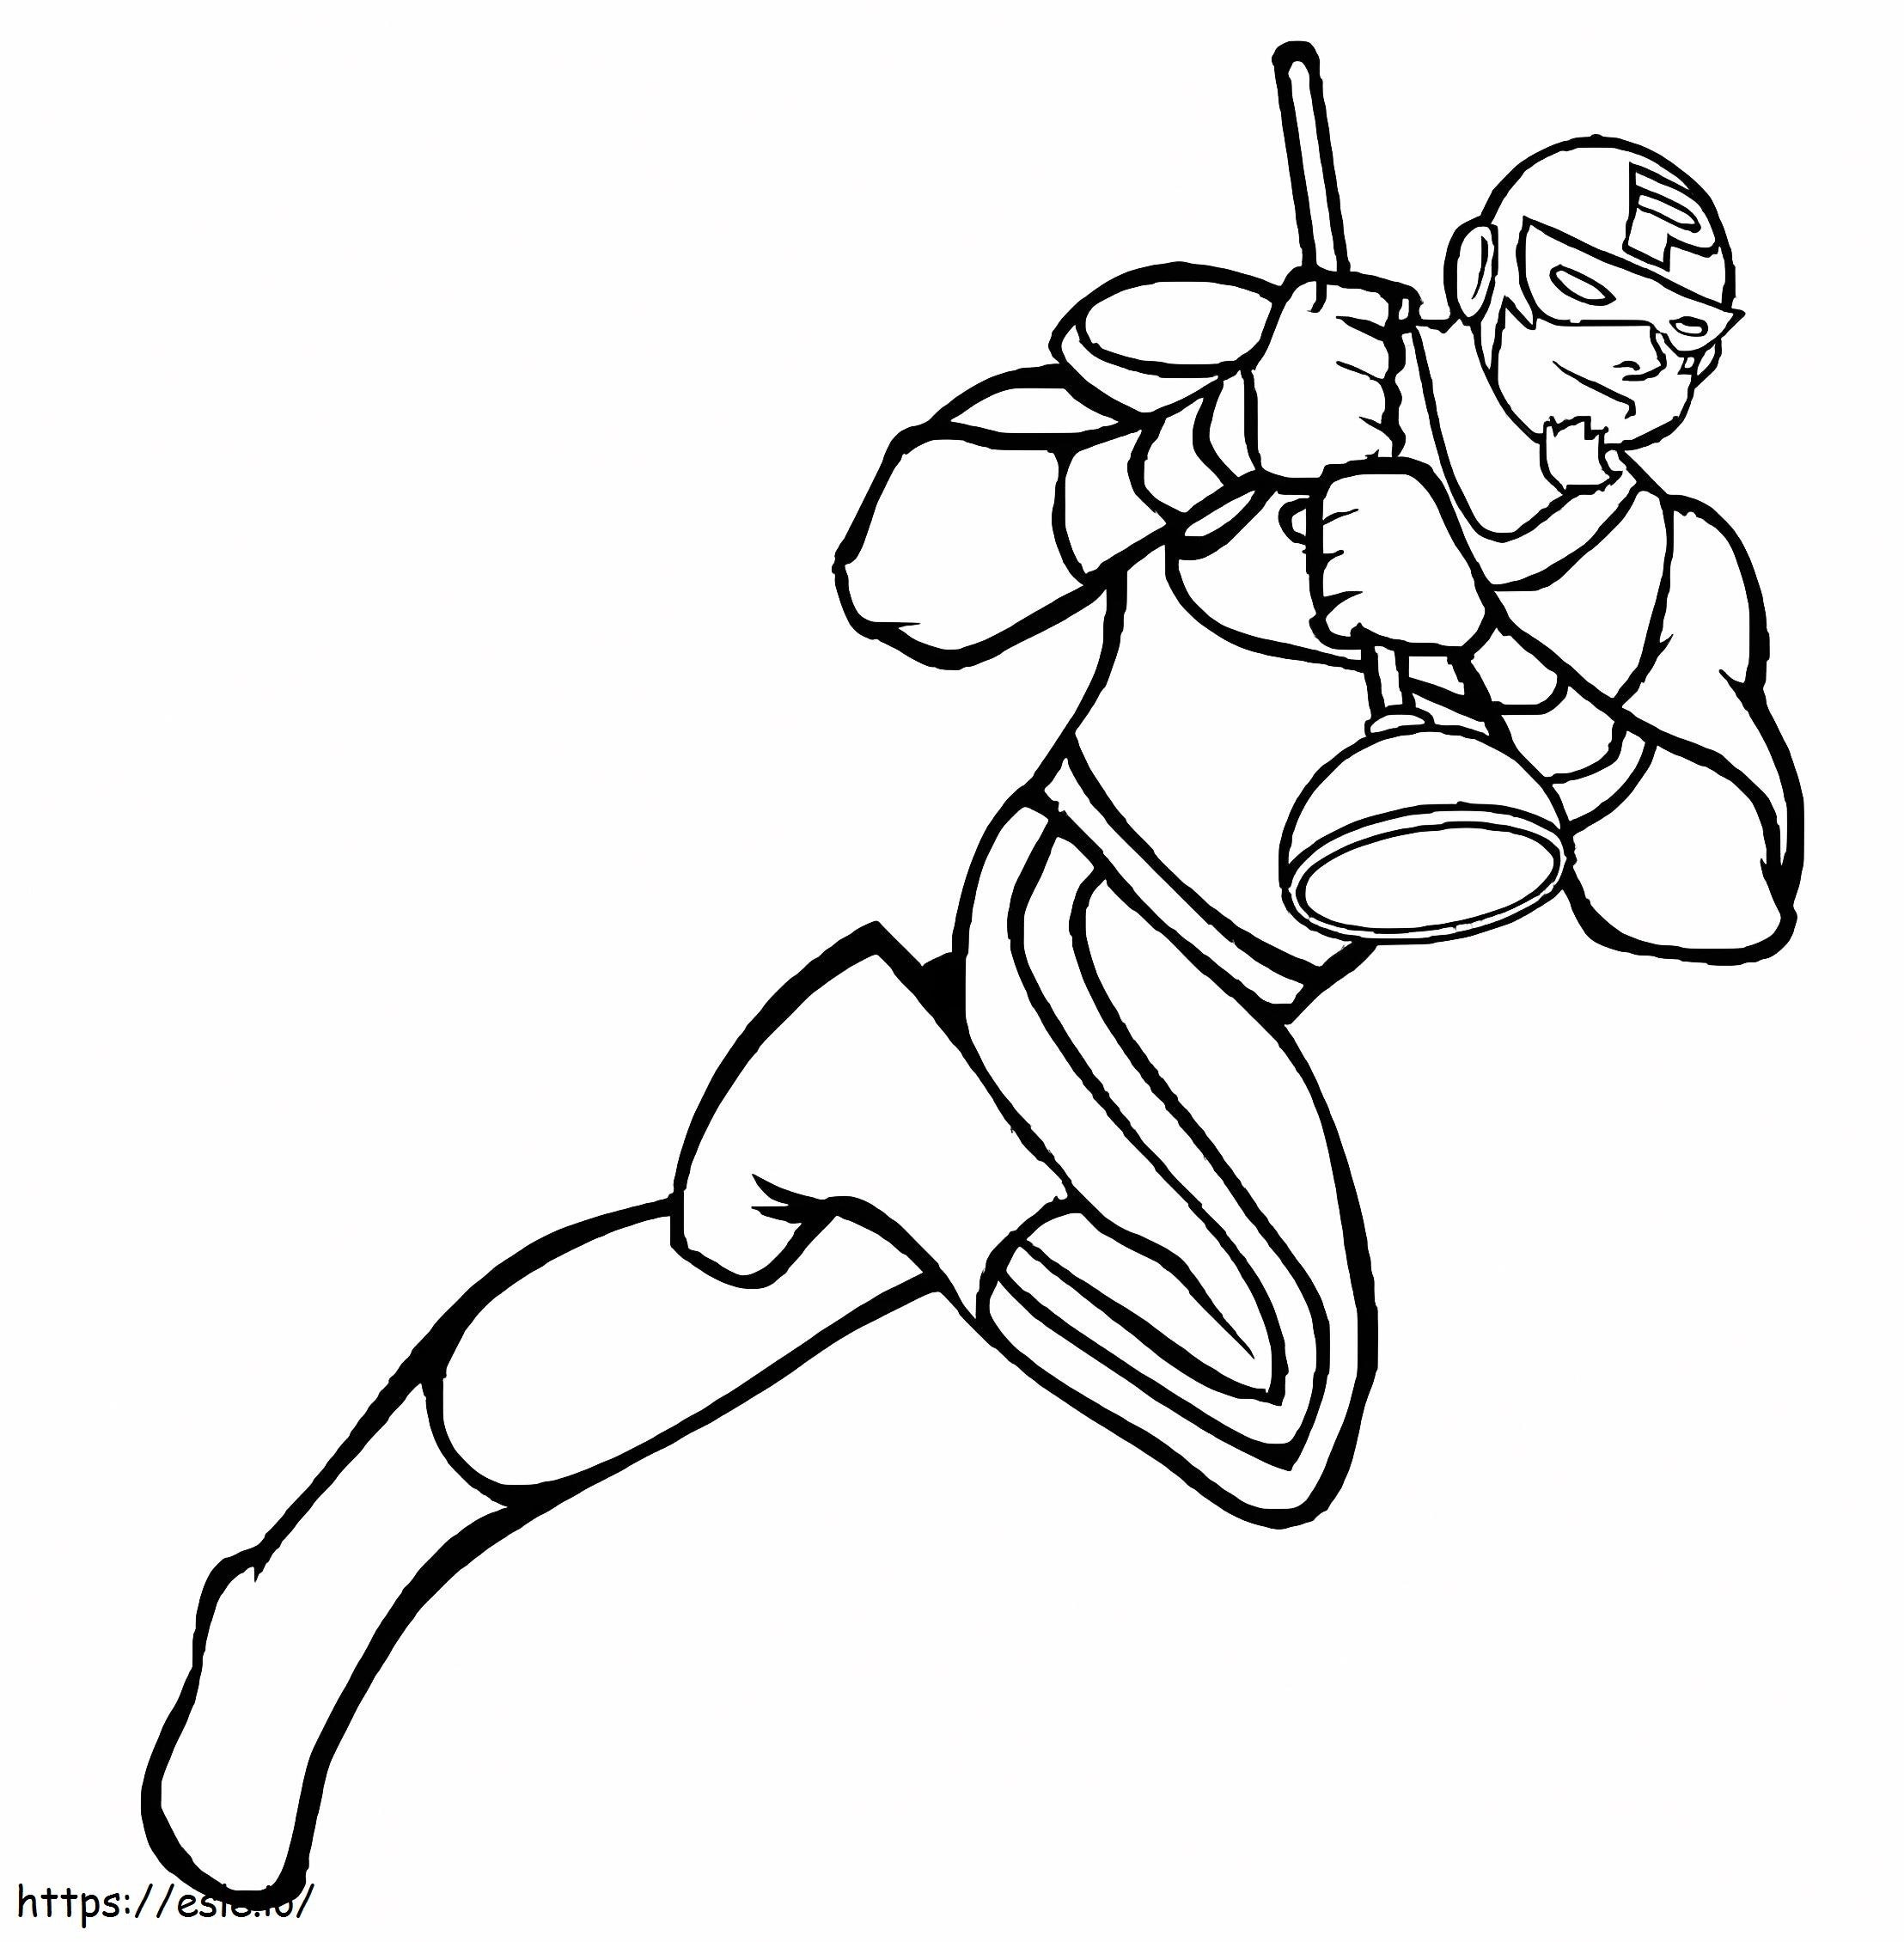 Super Plumber coloring page